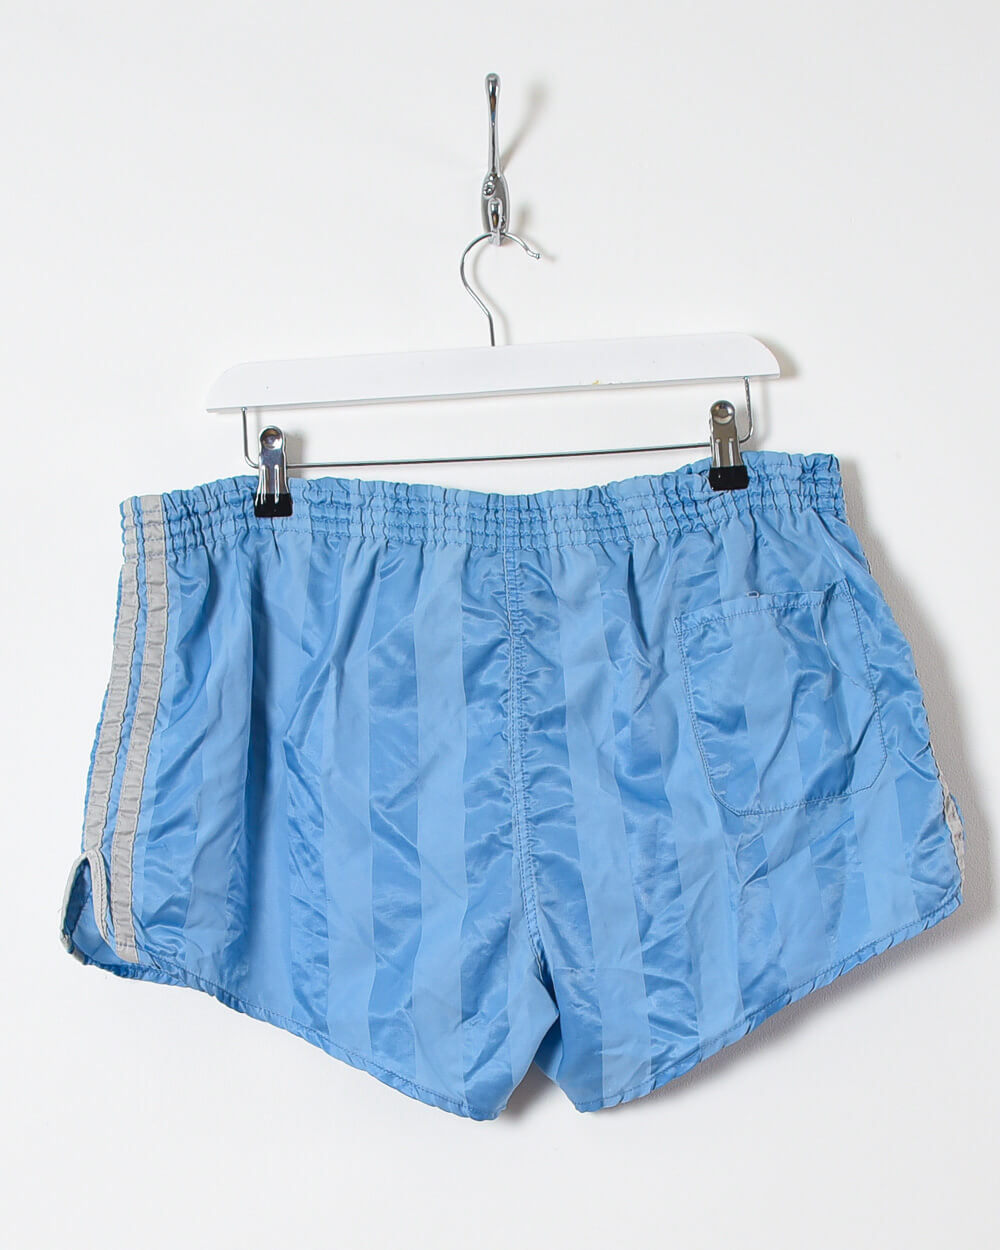 Adidas Shorts - W36 - Domno Vintage 90s, 80s, 00s Retro and Vintage Clothing 